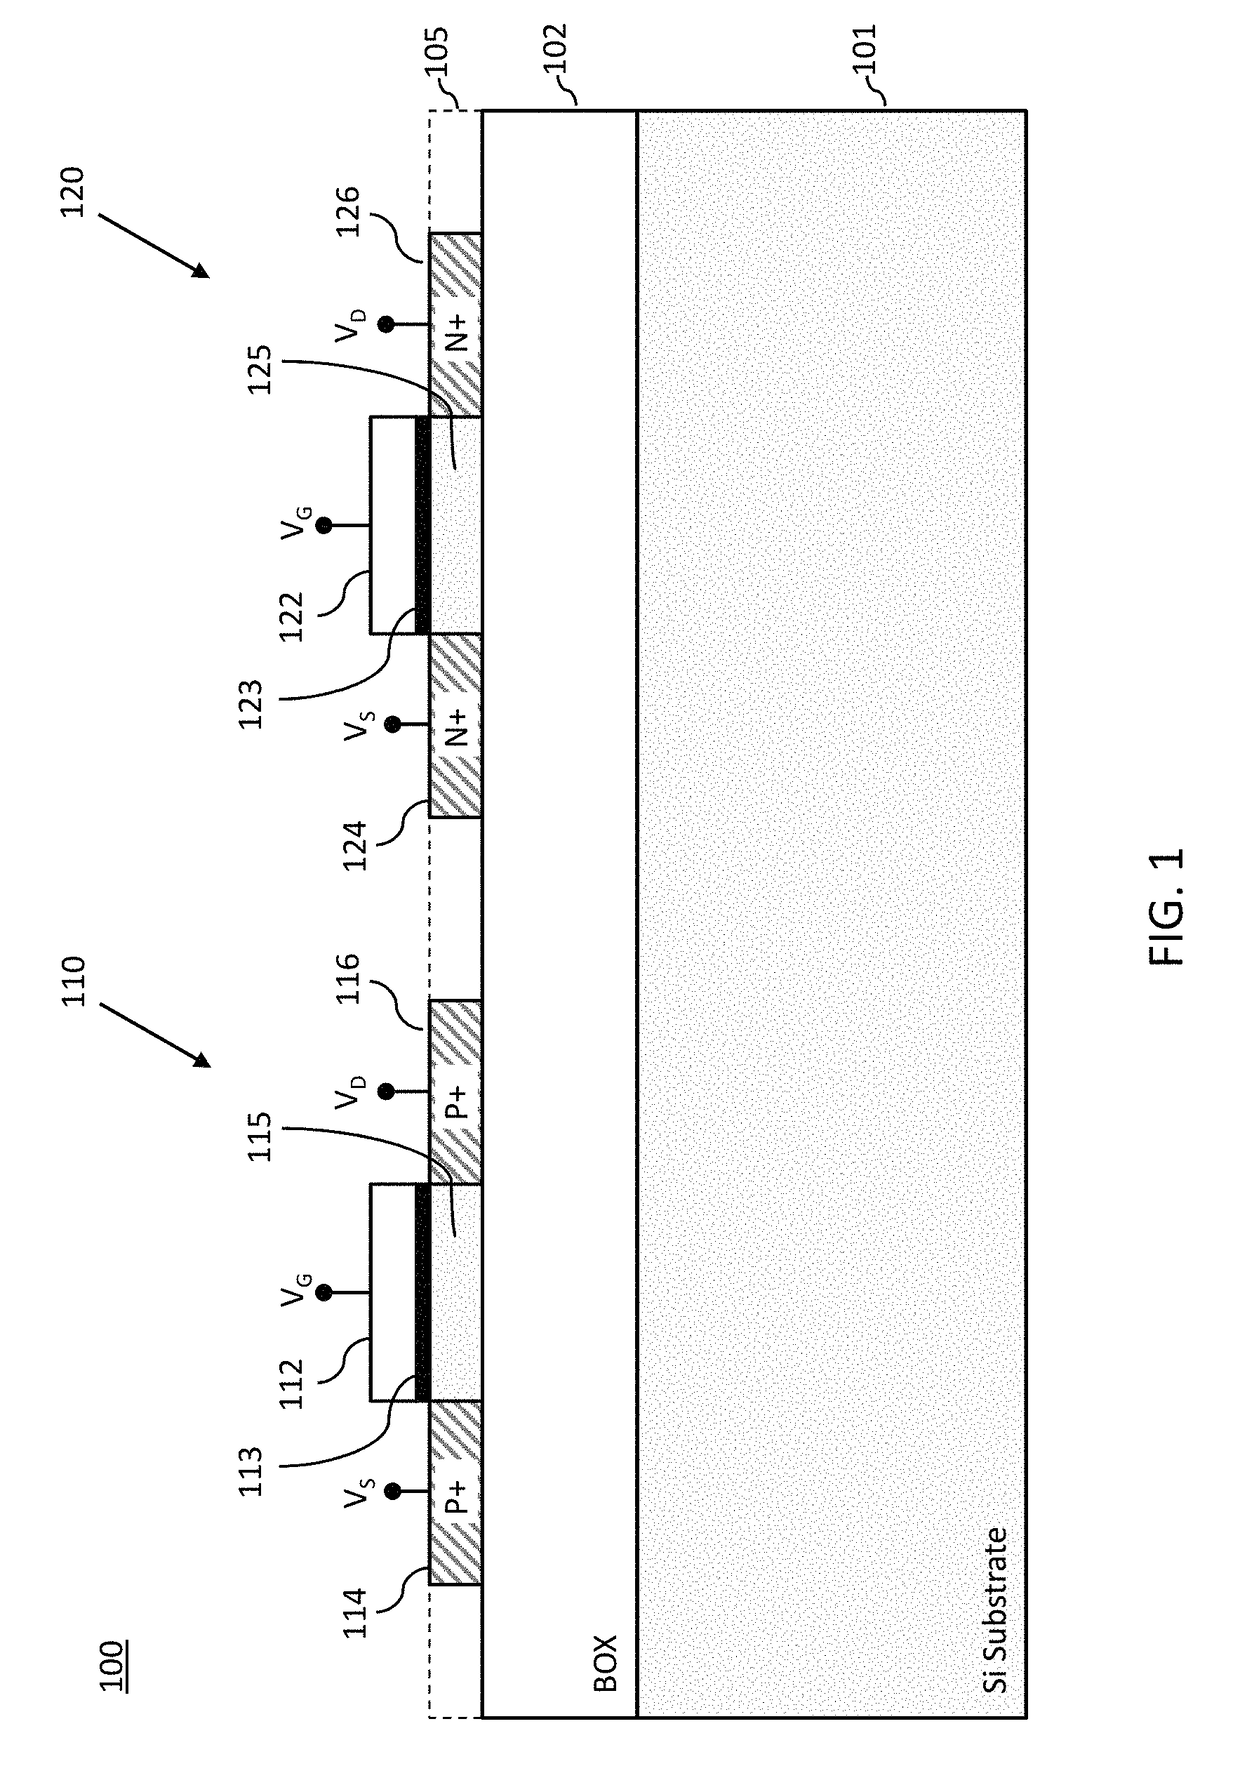 Systems, methods and apparatus for enabling high voltage circuits